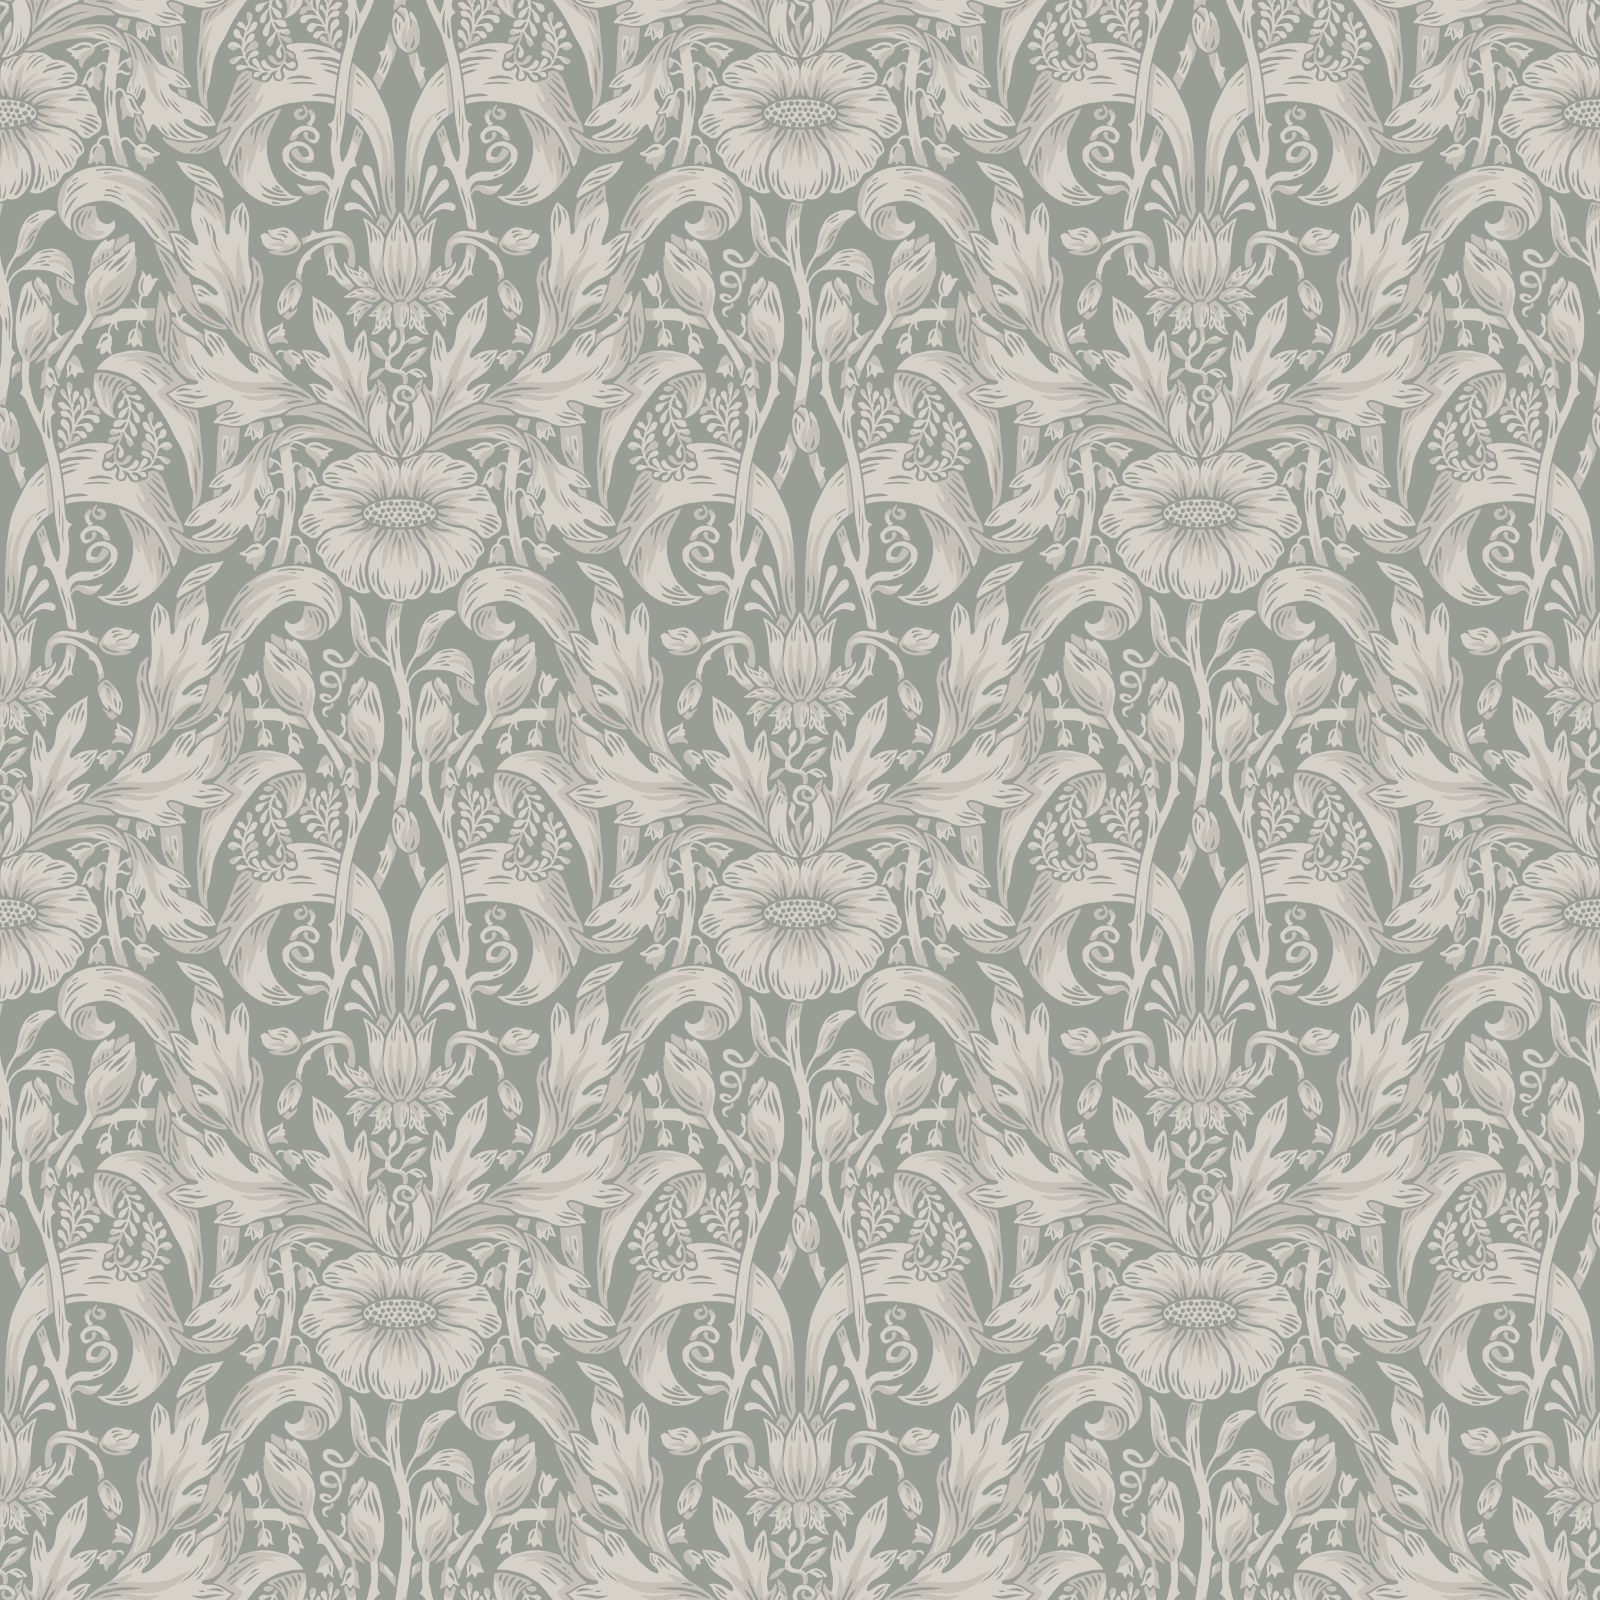 Emil wallpaper in a choice of 3 soft colourways